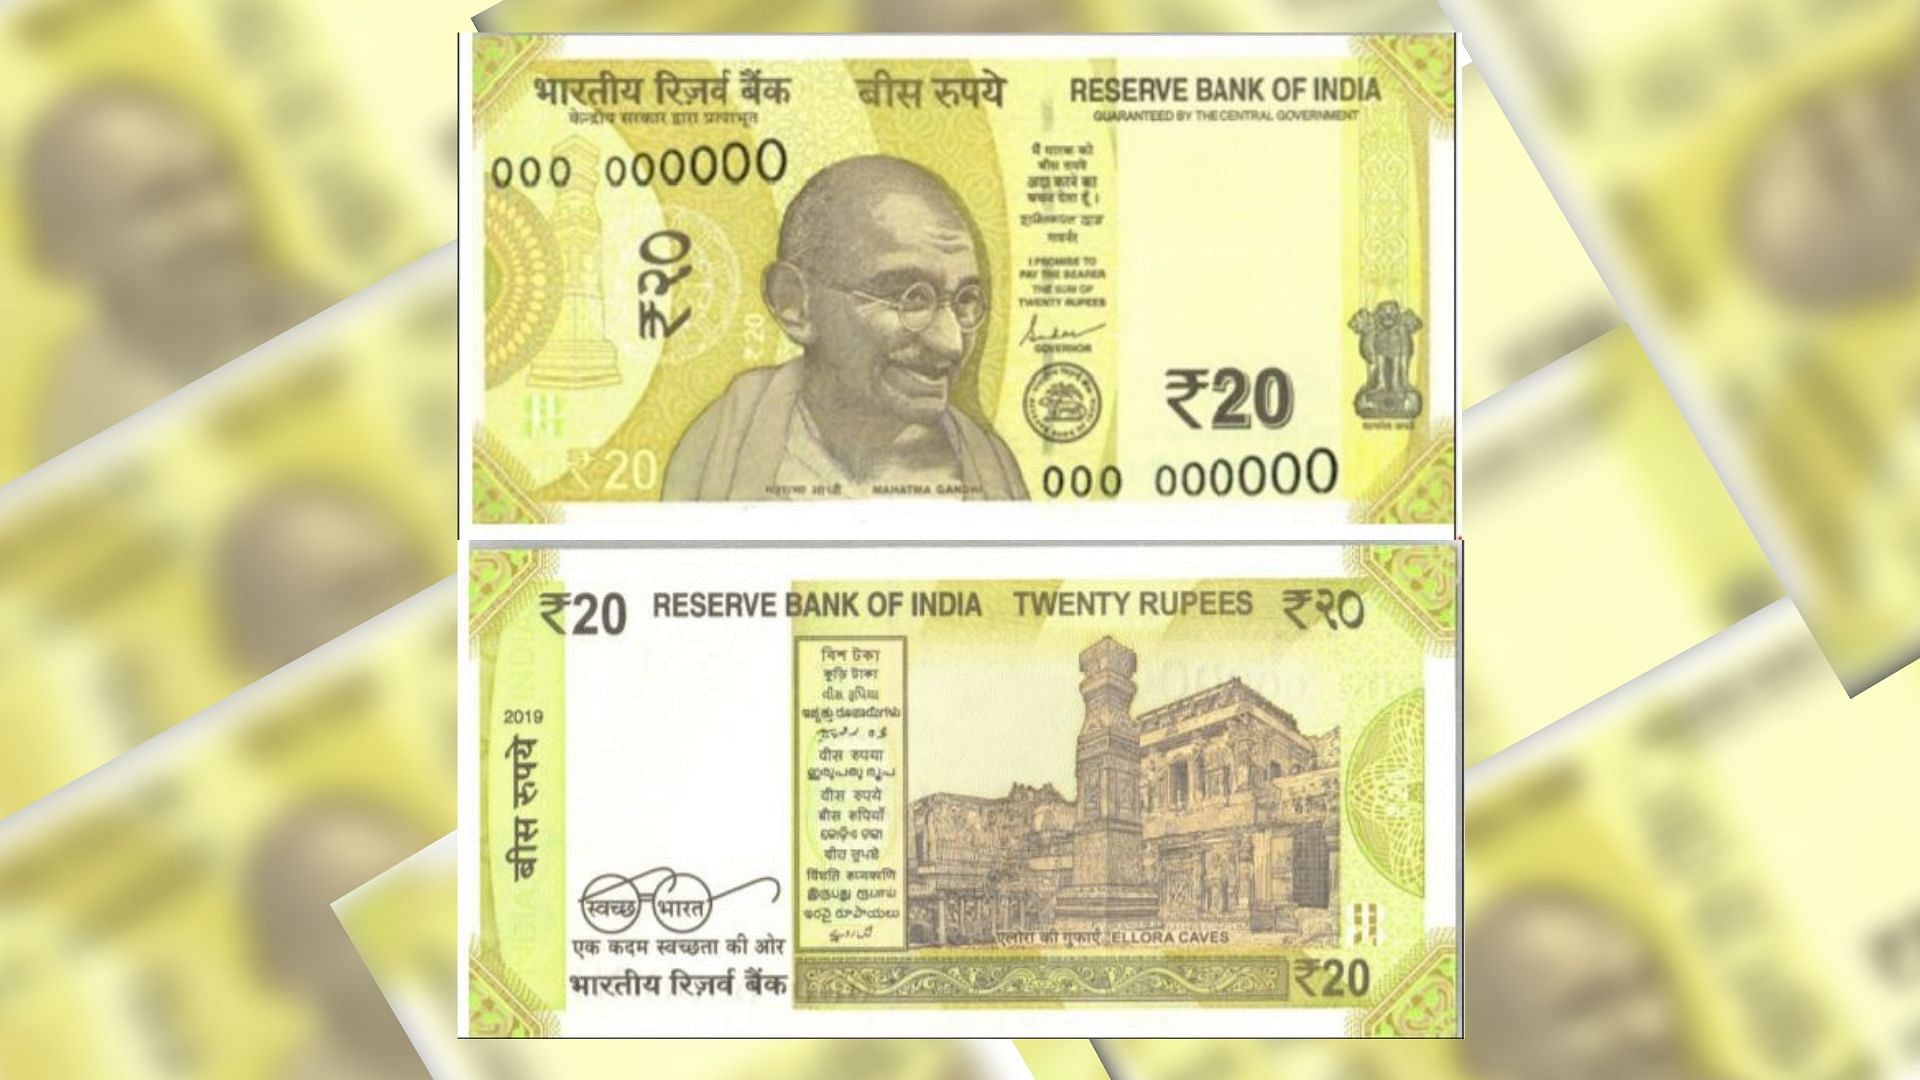 The new Rs 20 note, to be issued soon by RBI.